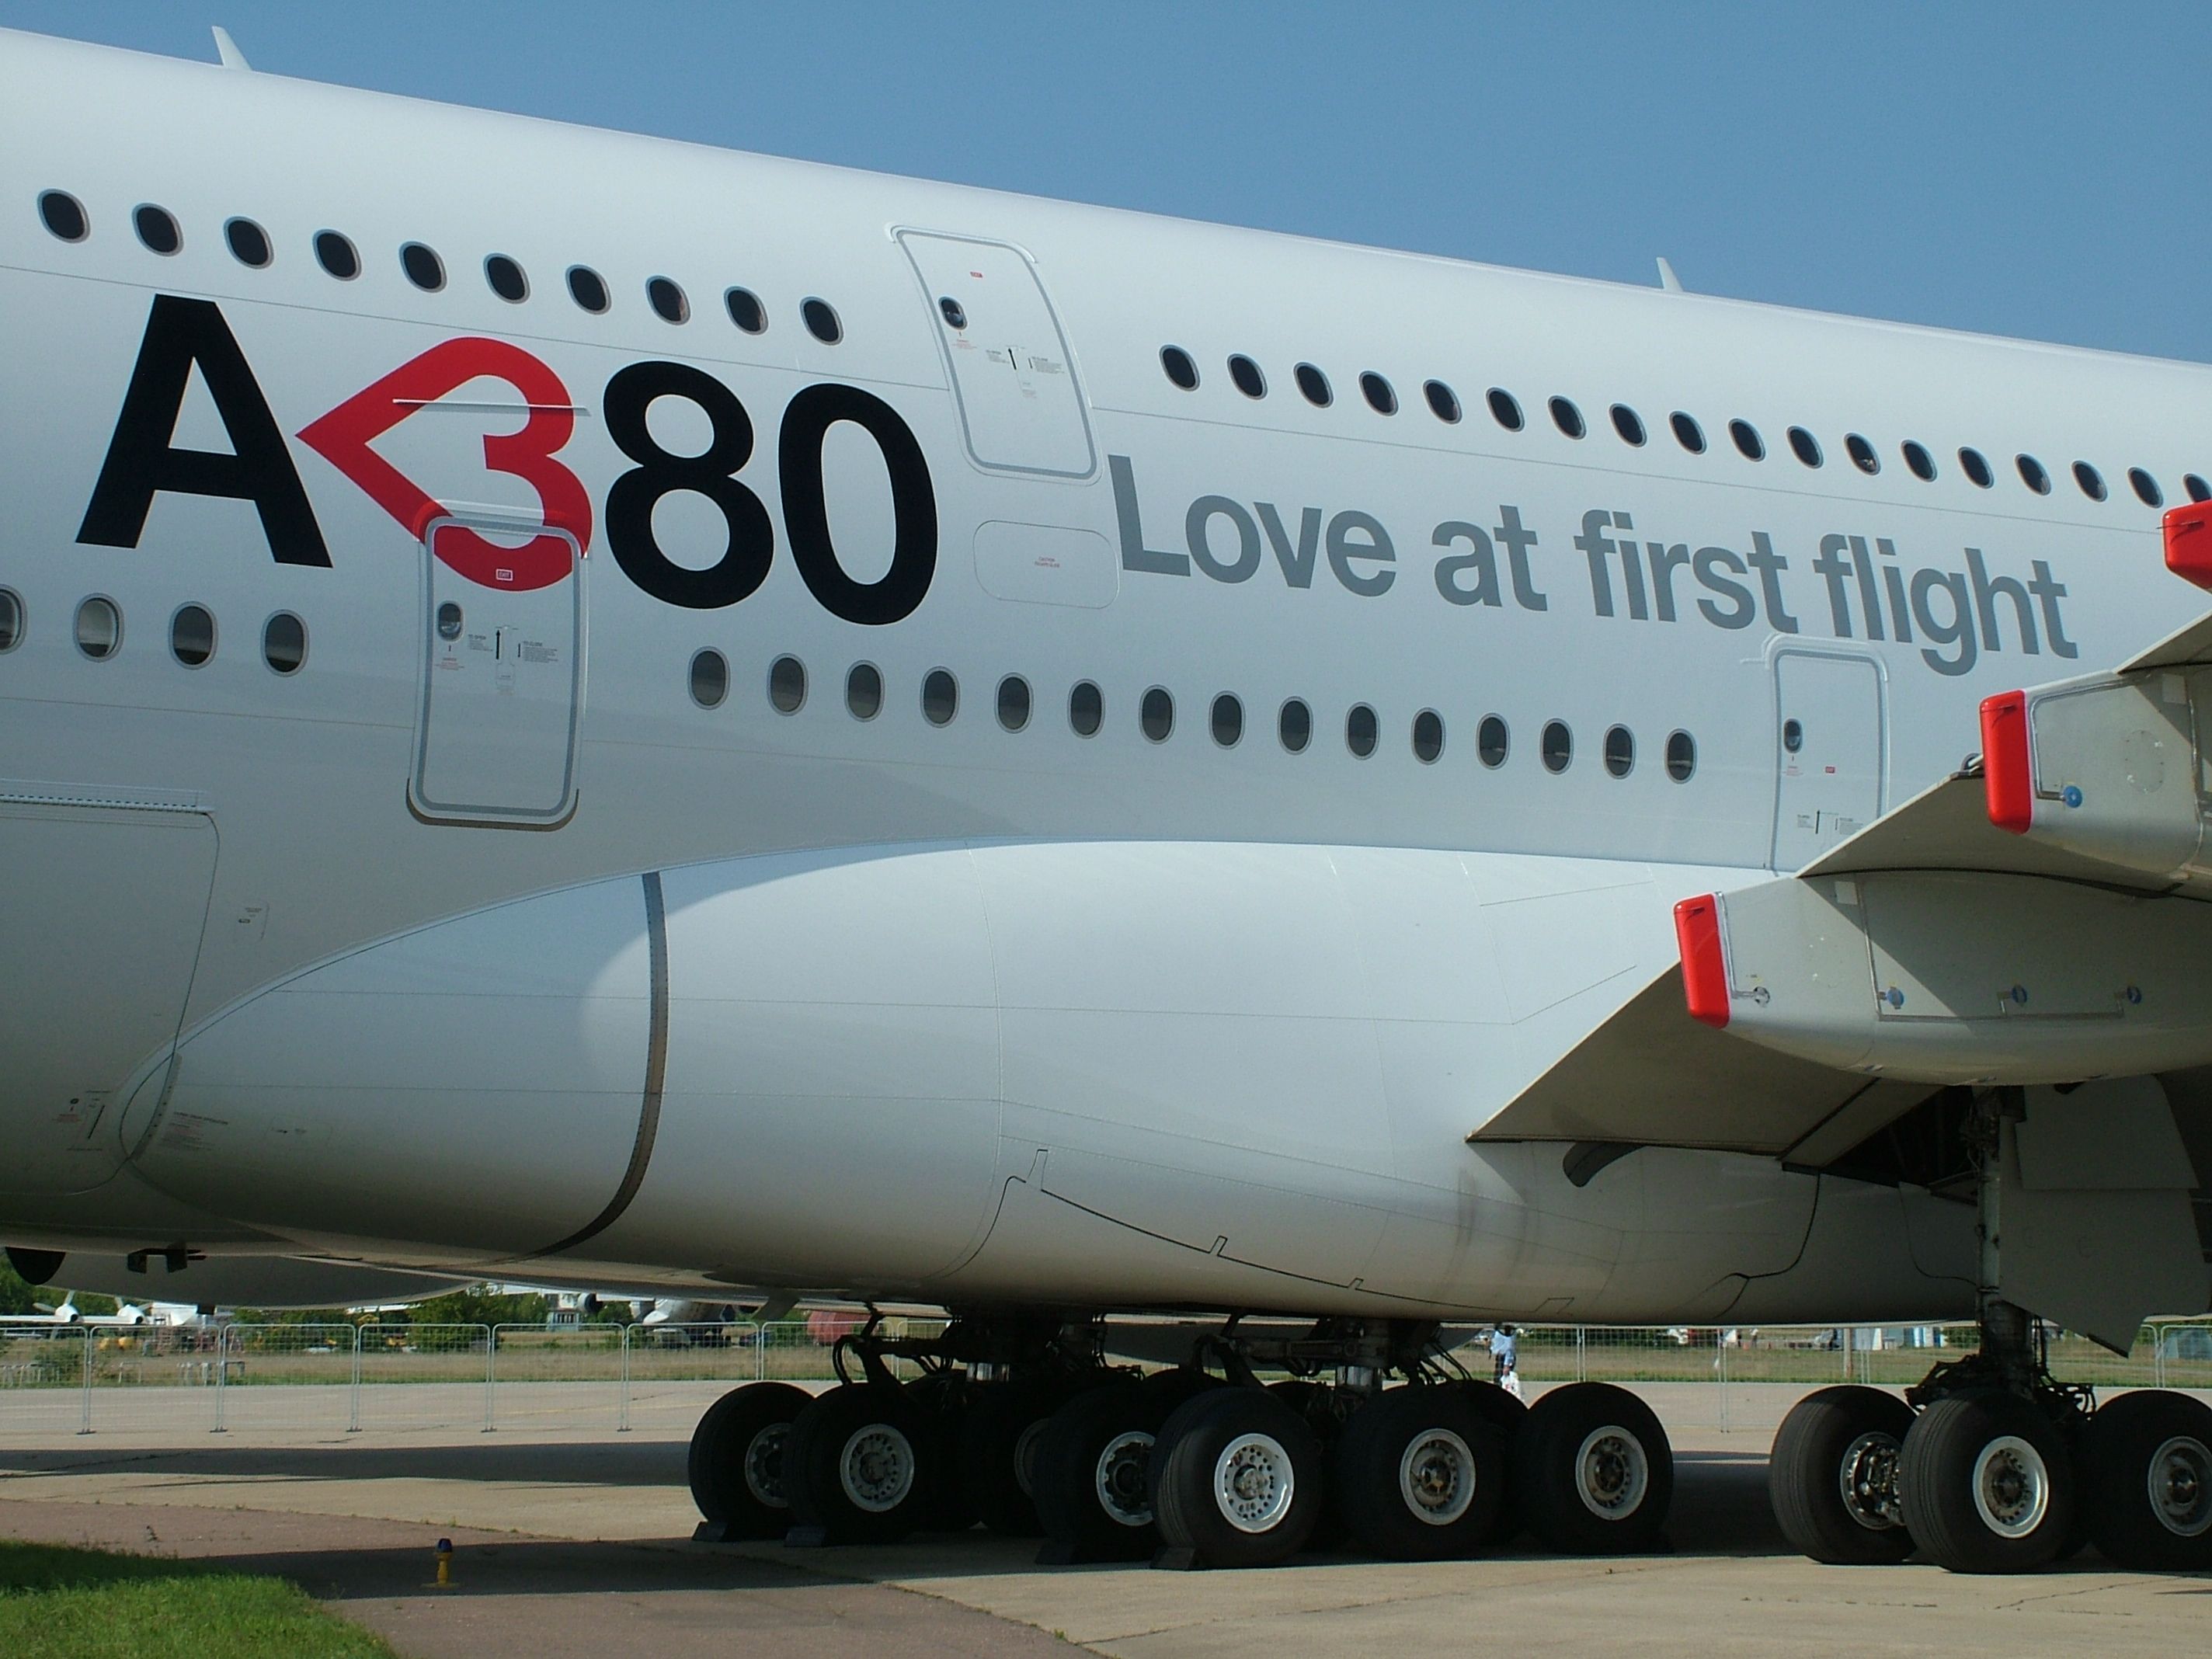 Airbus A380 fuselage